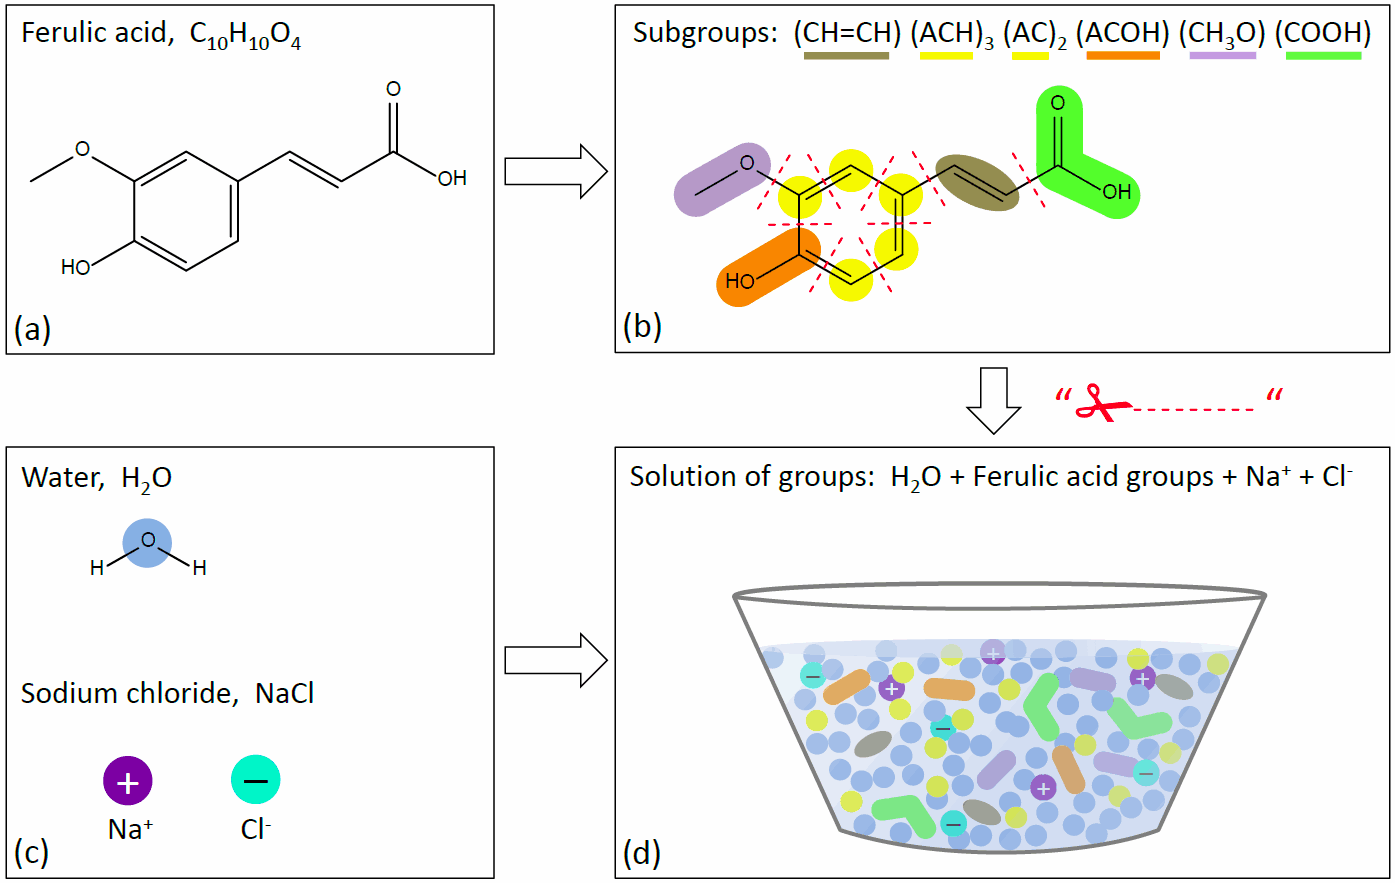 Fig. 3: Sketch of AIOMFAC subgroup assignments and solution of group mixing.